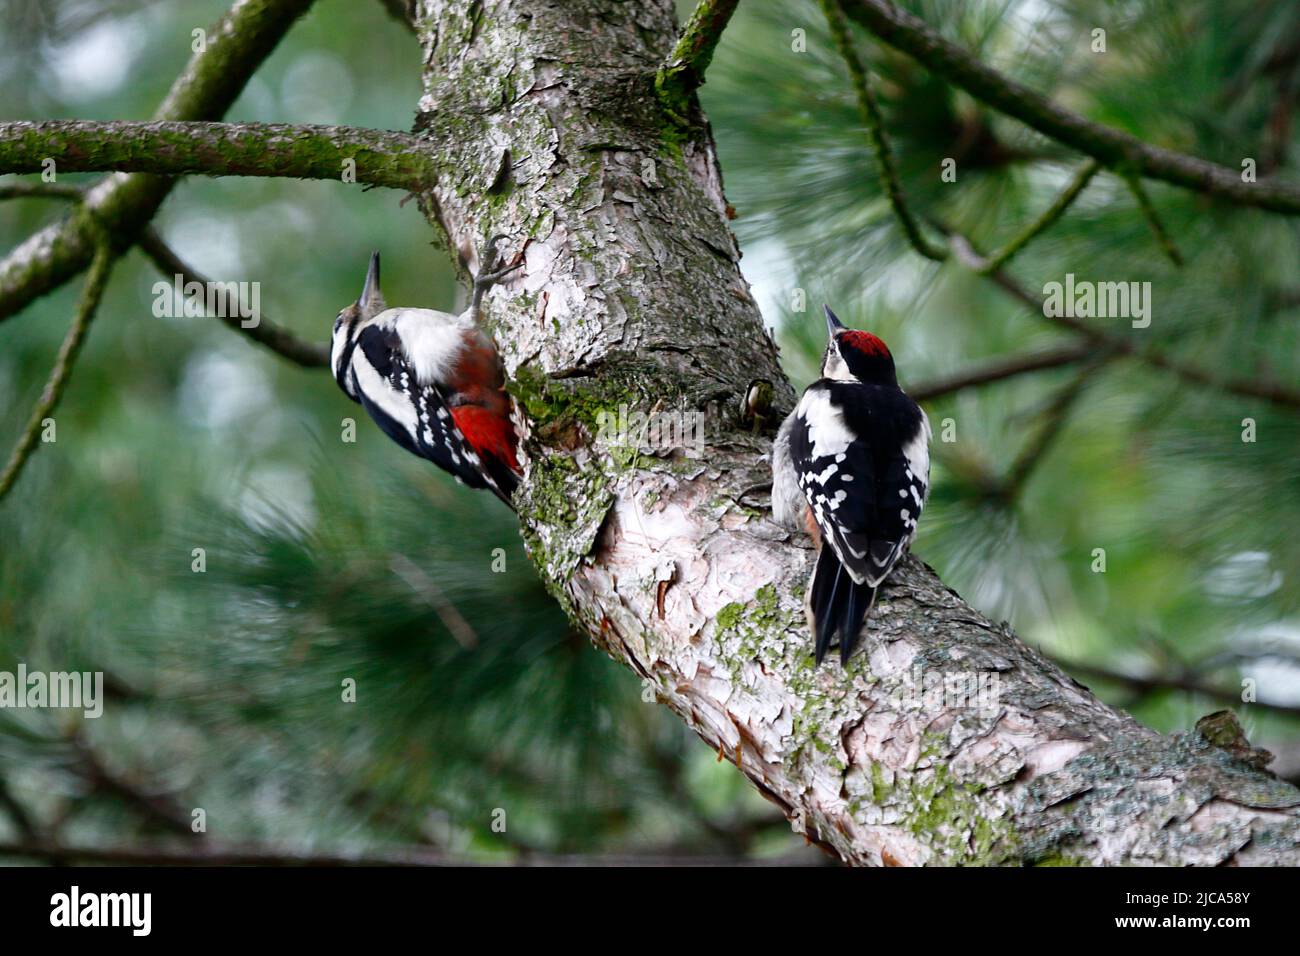 Two great spotted woodpeckers on a pine when examining the bark Stock Photo